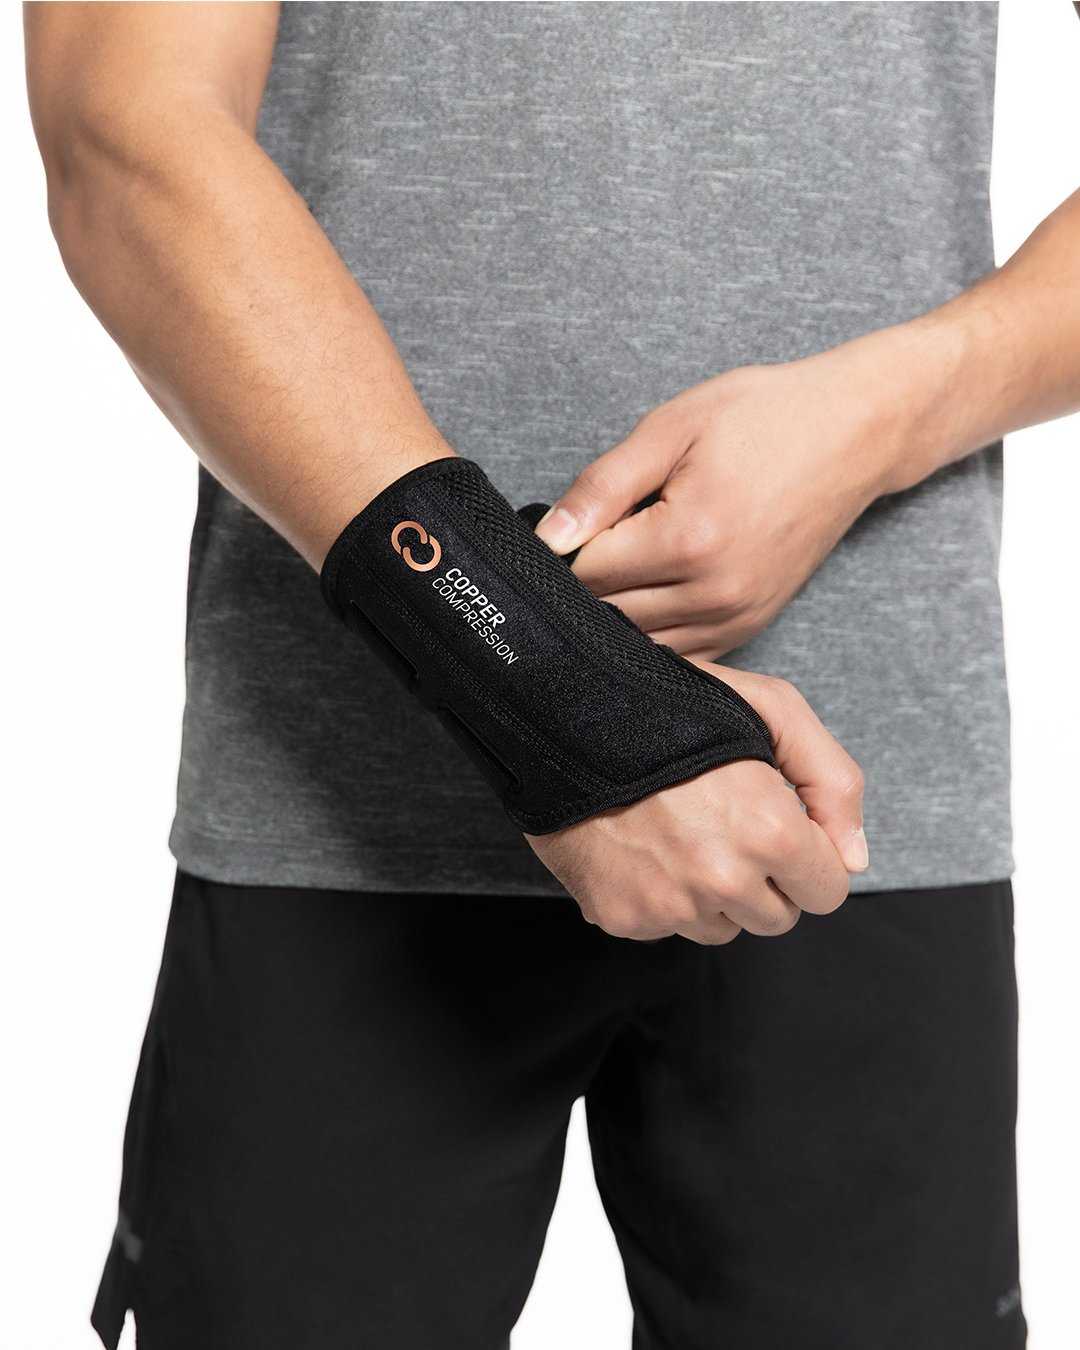 Copper Compression Recovery Wrist Brace - Copper Infused Adjustable Support  Splint for Pain, Carpal Tunnel, Arthritis, Tendonitis, RSI, Sprain. Night  Day Splint for Men Women - Fits Right Hand S-M Right Hand